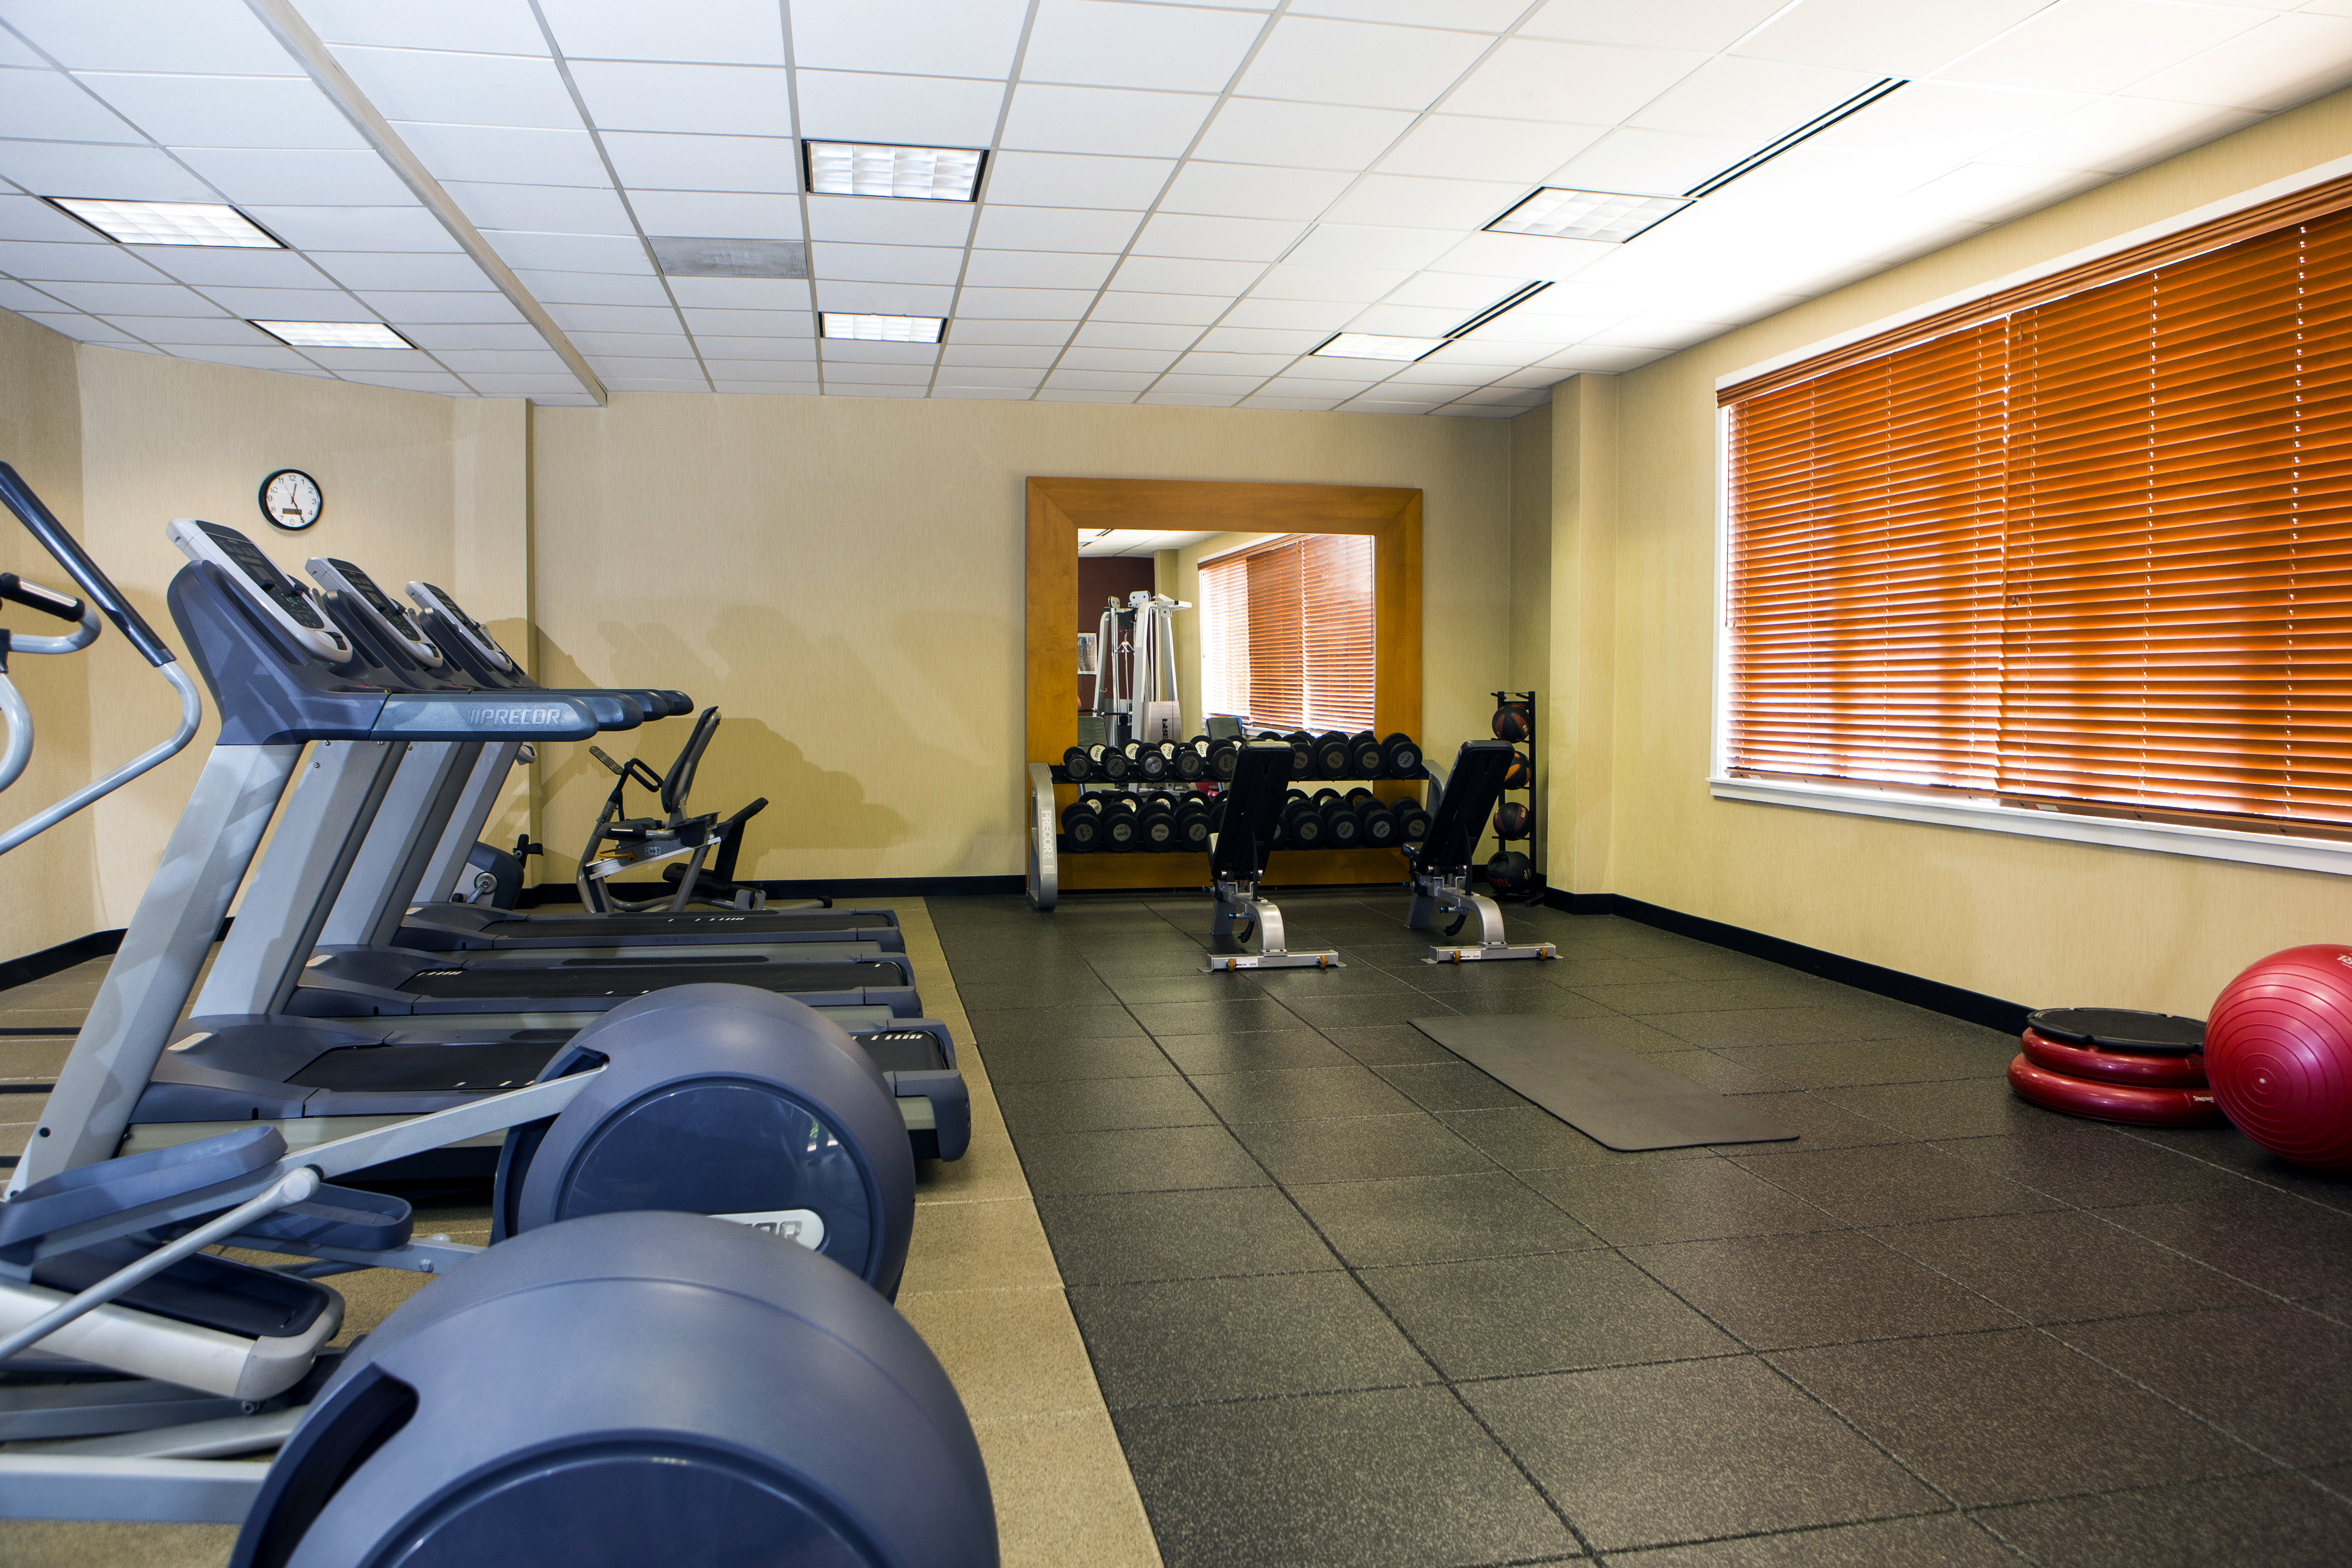 Fitness Room With Cardio Equipment, Wall Clock, Free Weights, Weight Benches, Aerobic Stepper, and Red Exercise Ball